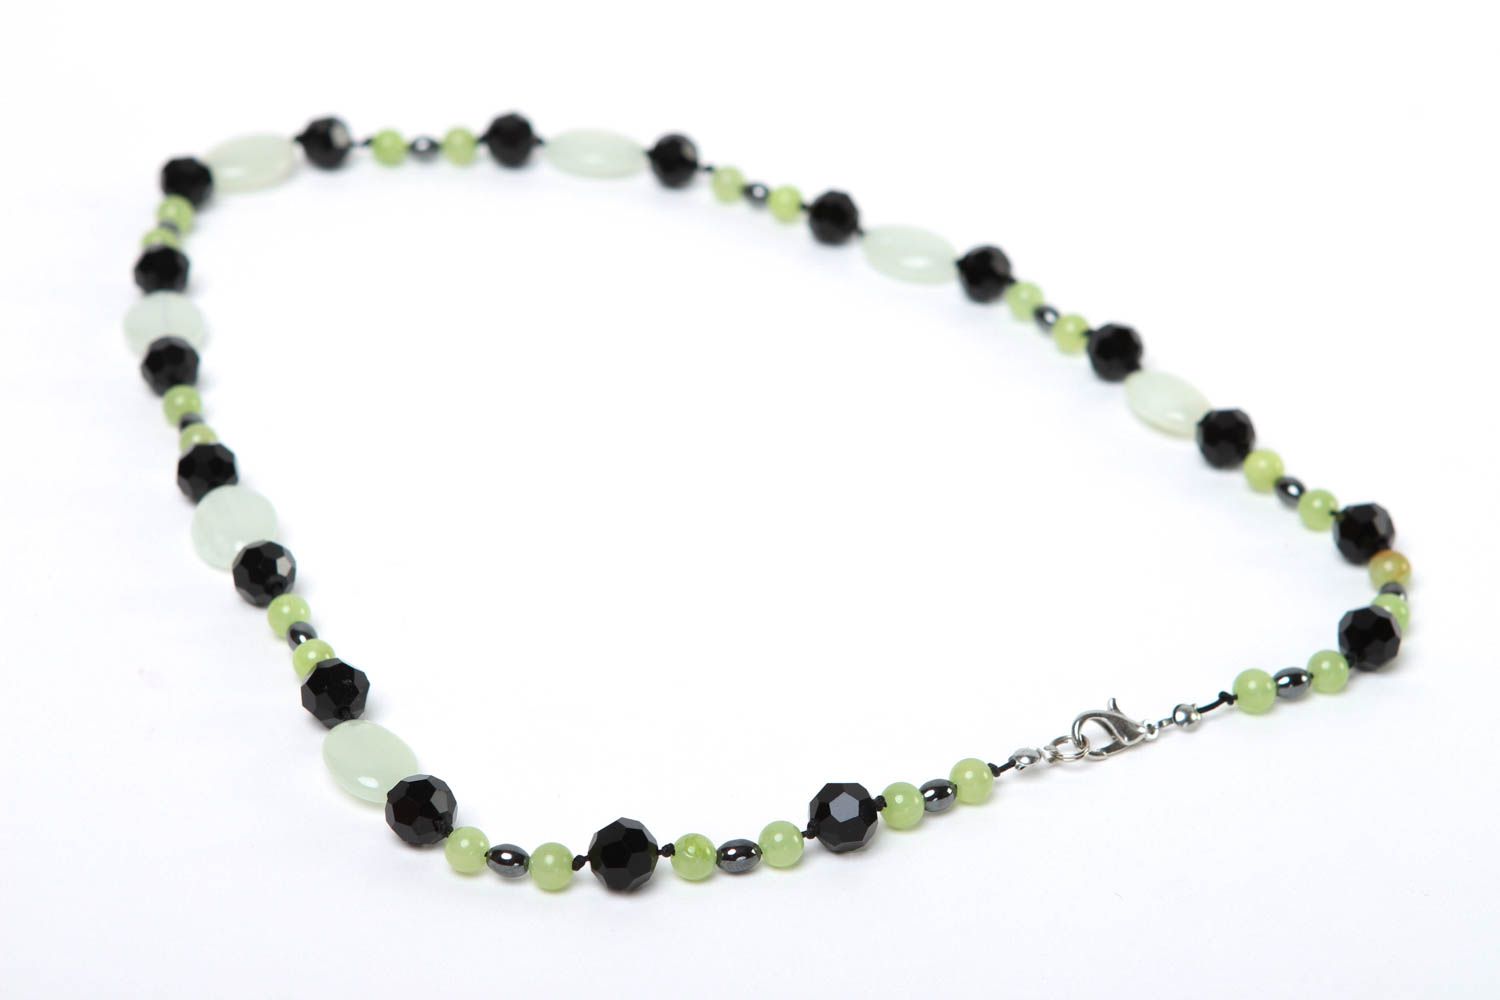 Bead necklace handmade necklaces for women long necklaces gifts for women photo 4